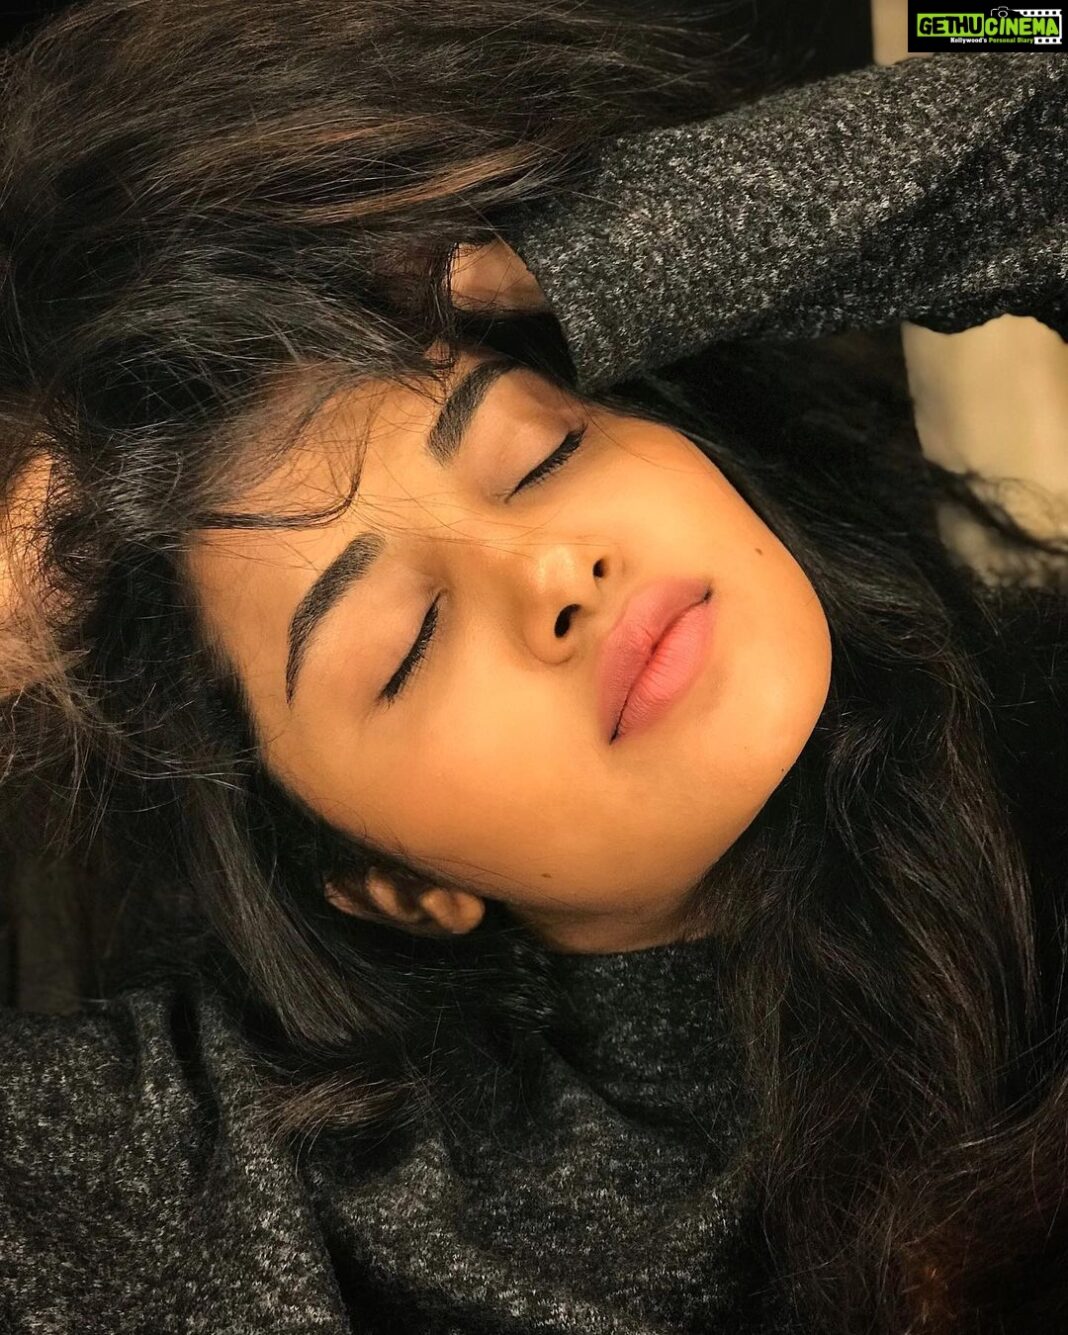 Anupama Parameswaran Instagram - “I’m not the perfect person. I'm not the most happy person. I get angry, and I get mad sometimes, but I try my best to control my thoughts. Because that flows throughout your body.”